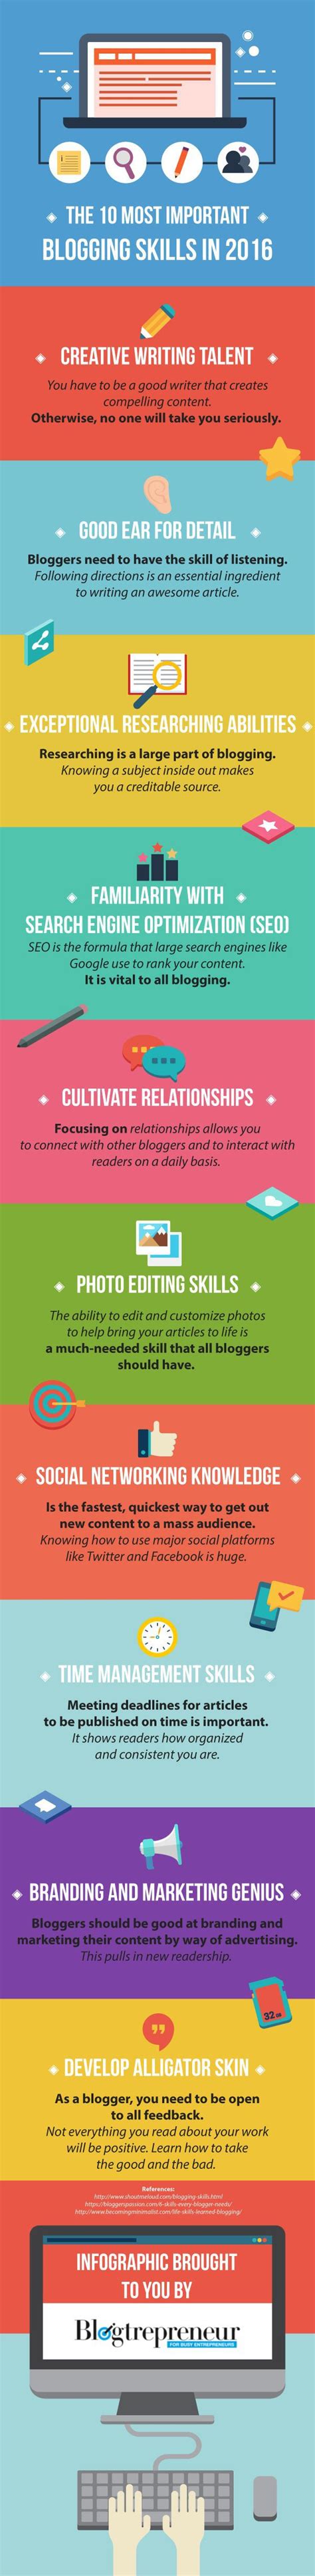 The 10 Most Important Blogging Skills In 2016 The Savvy Solopreneur